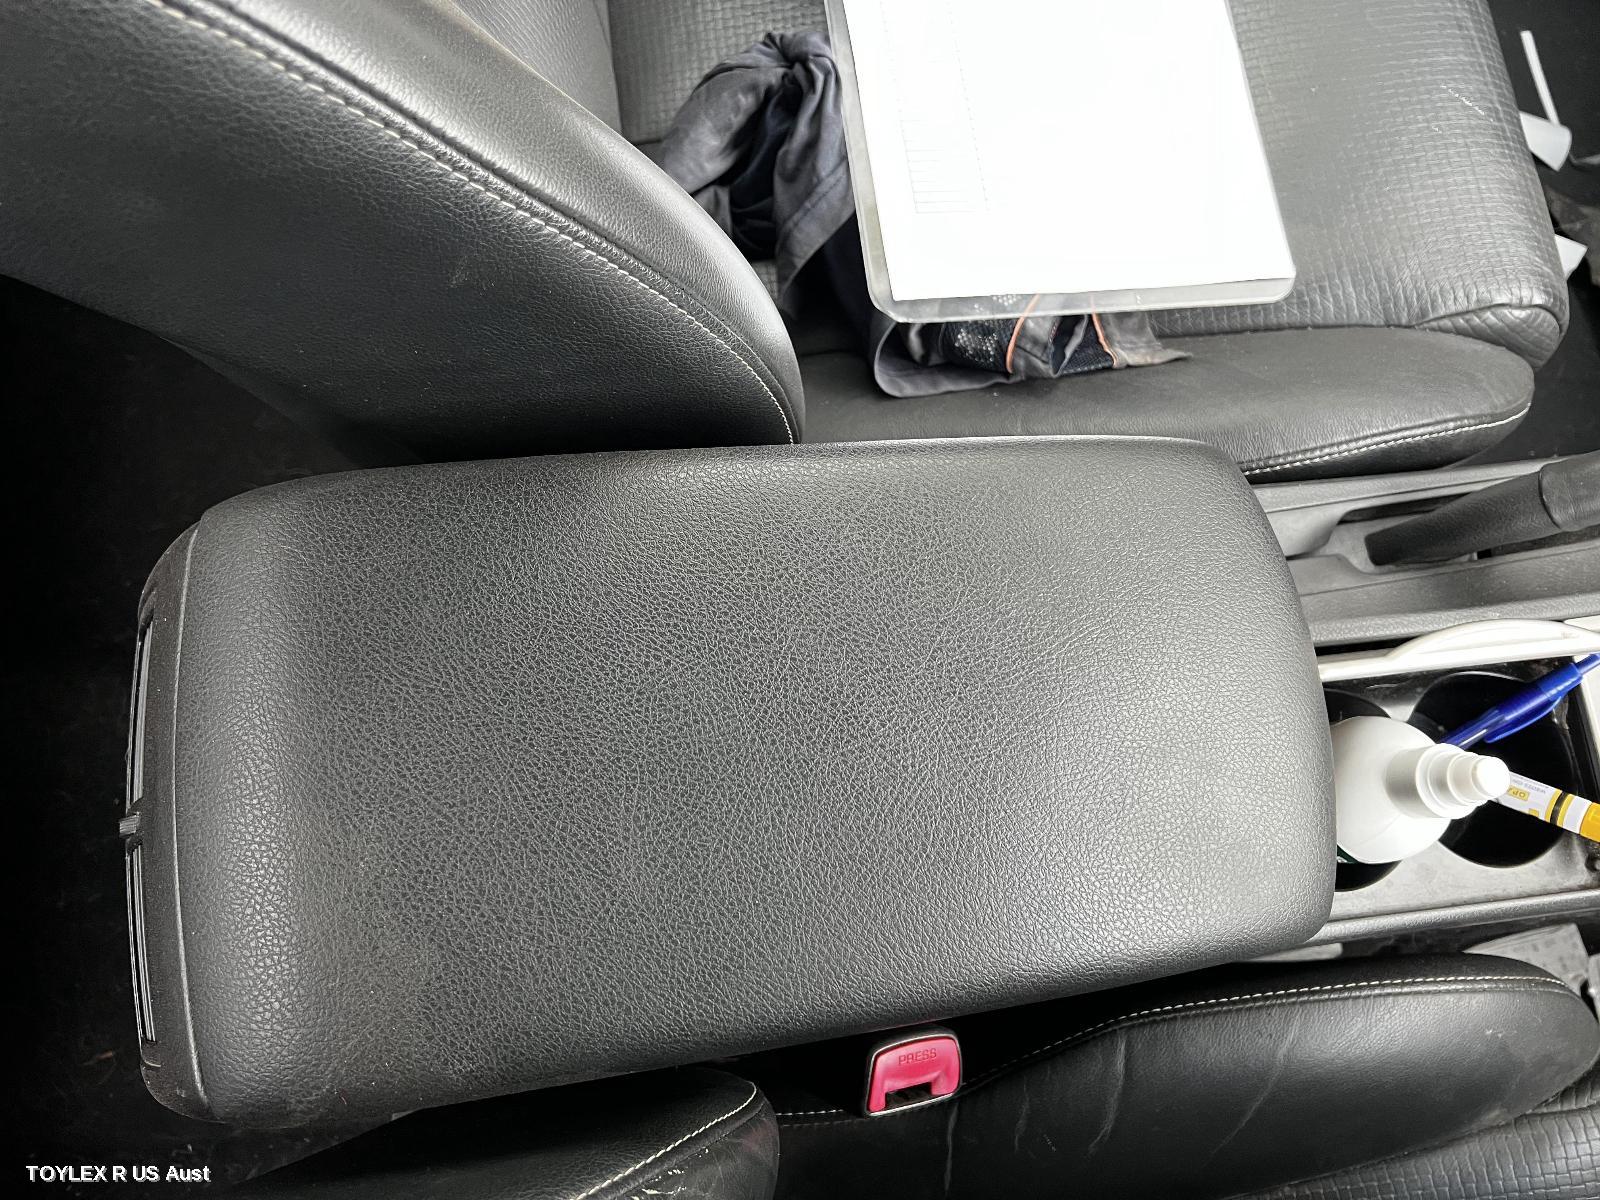 TOYOTA CAMRY, Console, ACV40, 06/06-11/11